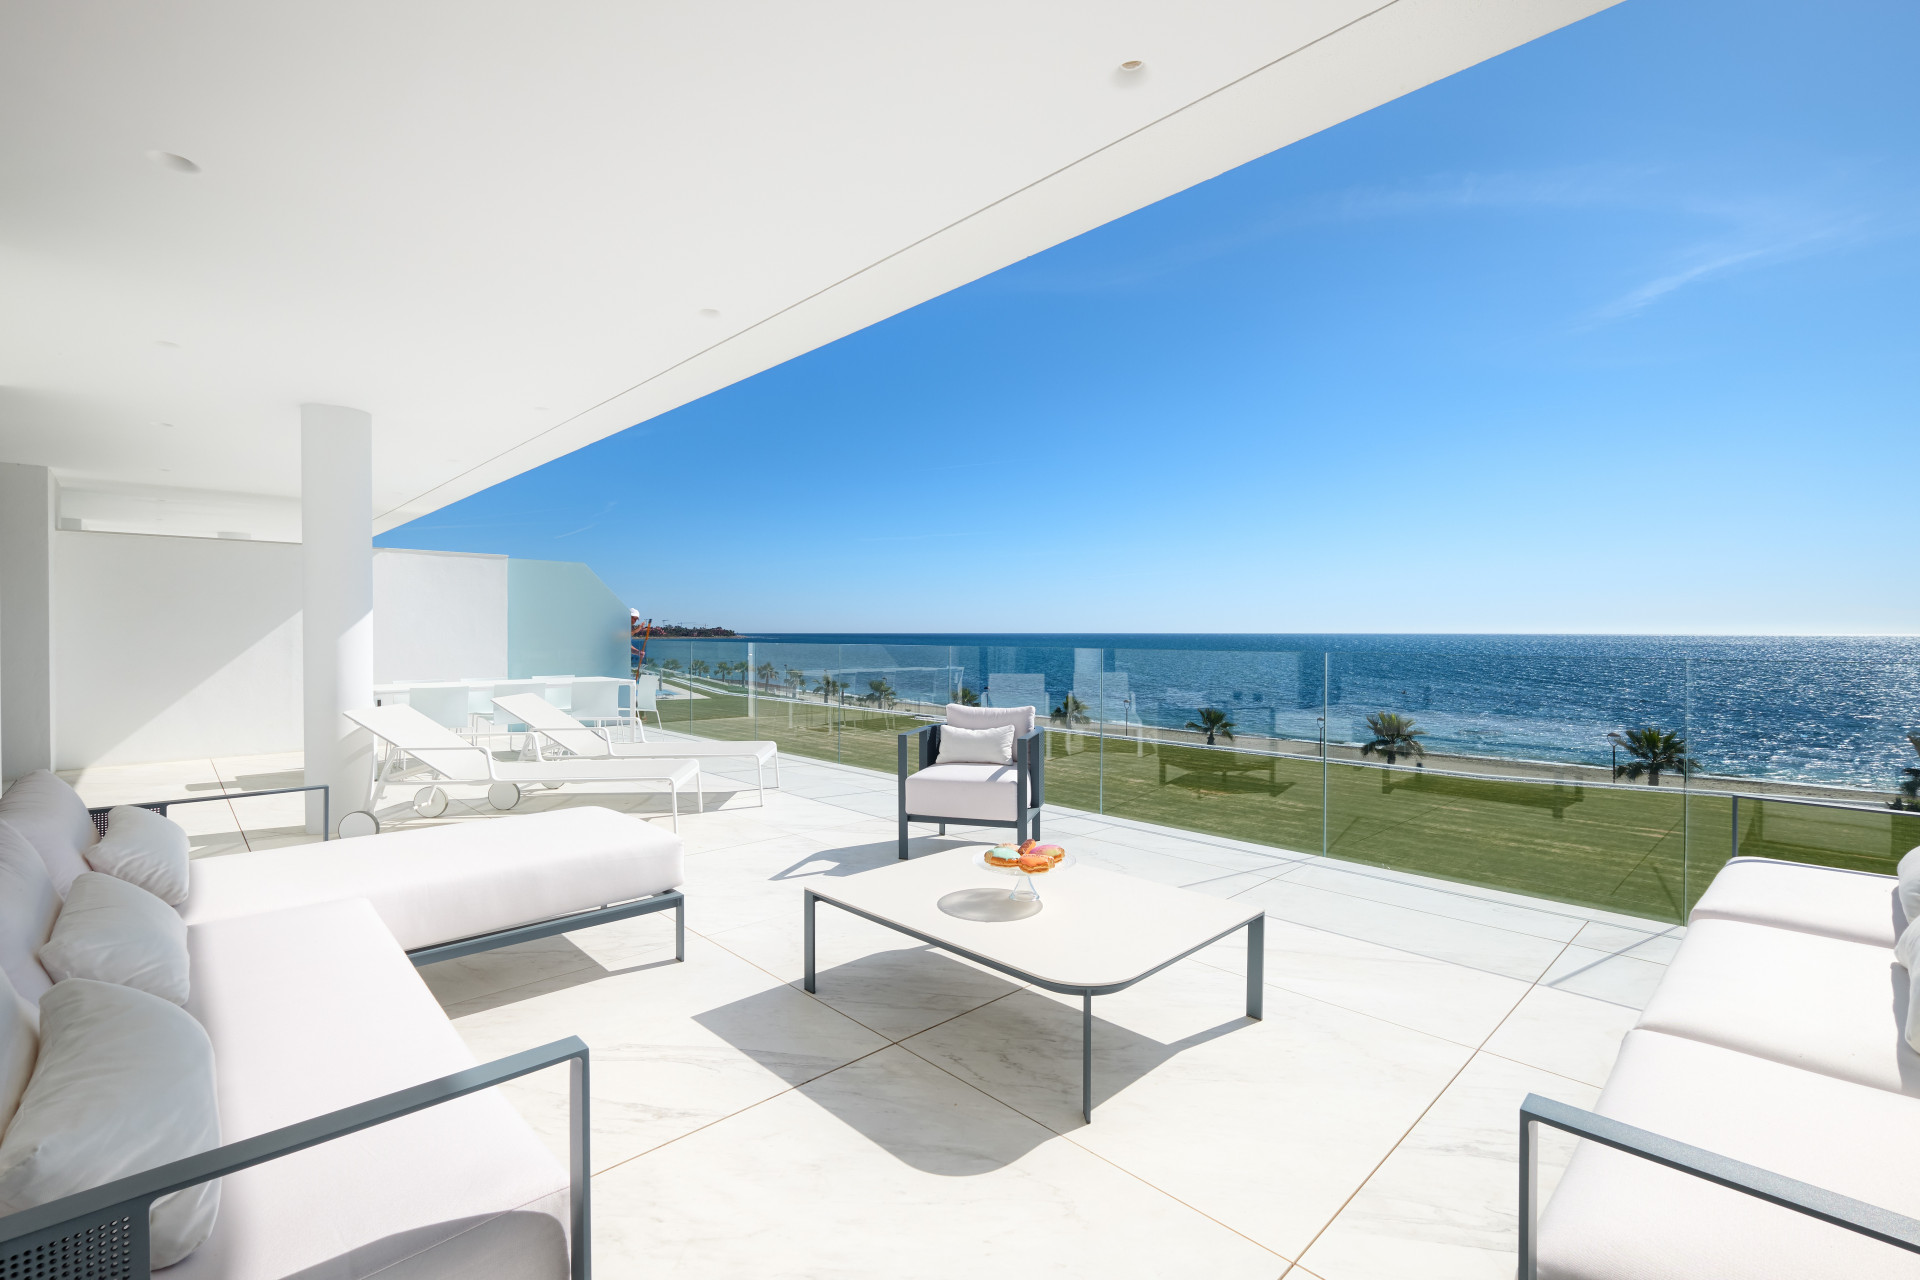 Stunning fround floor line beach modern apartment for sale on the New Golden Mile in Estepona